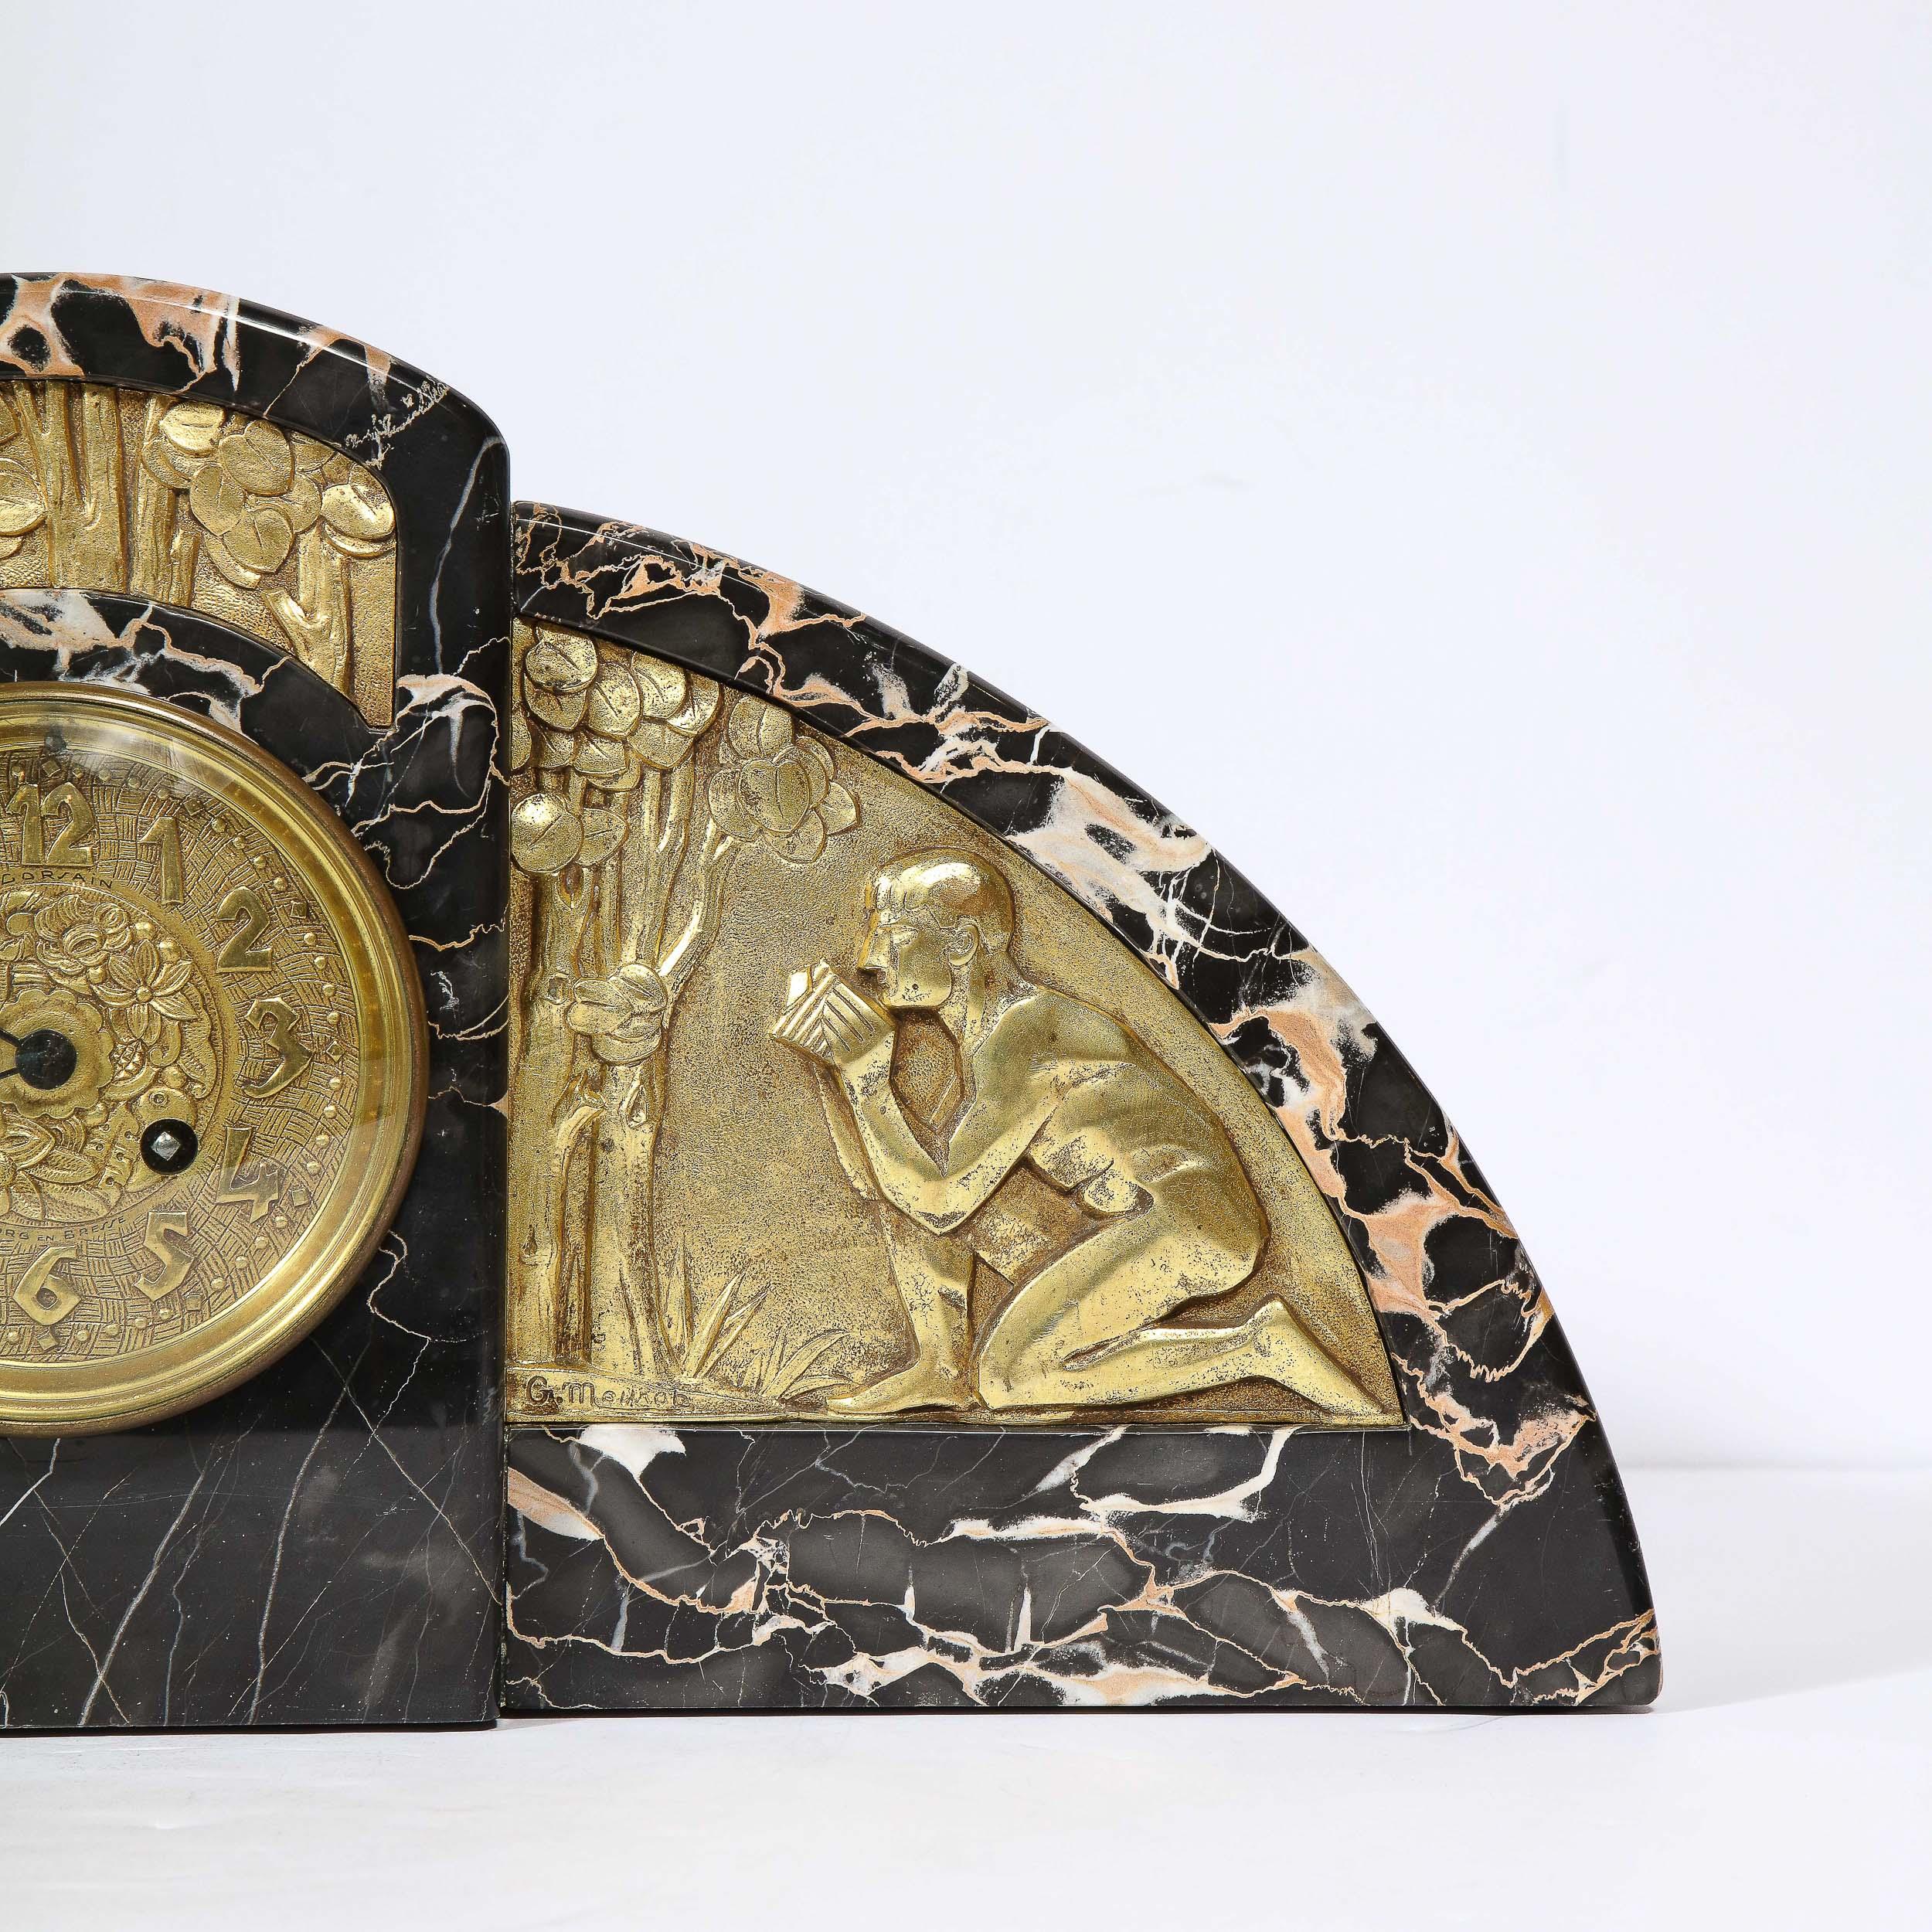 French 1930s Art Deco Streamlined Neoclassical Figurative Exotic Marble & Bronze Clock